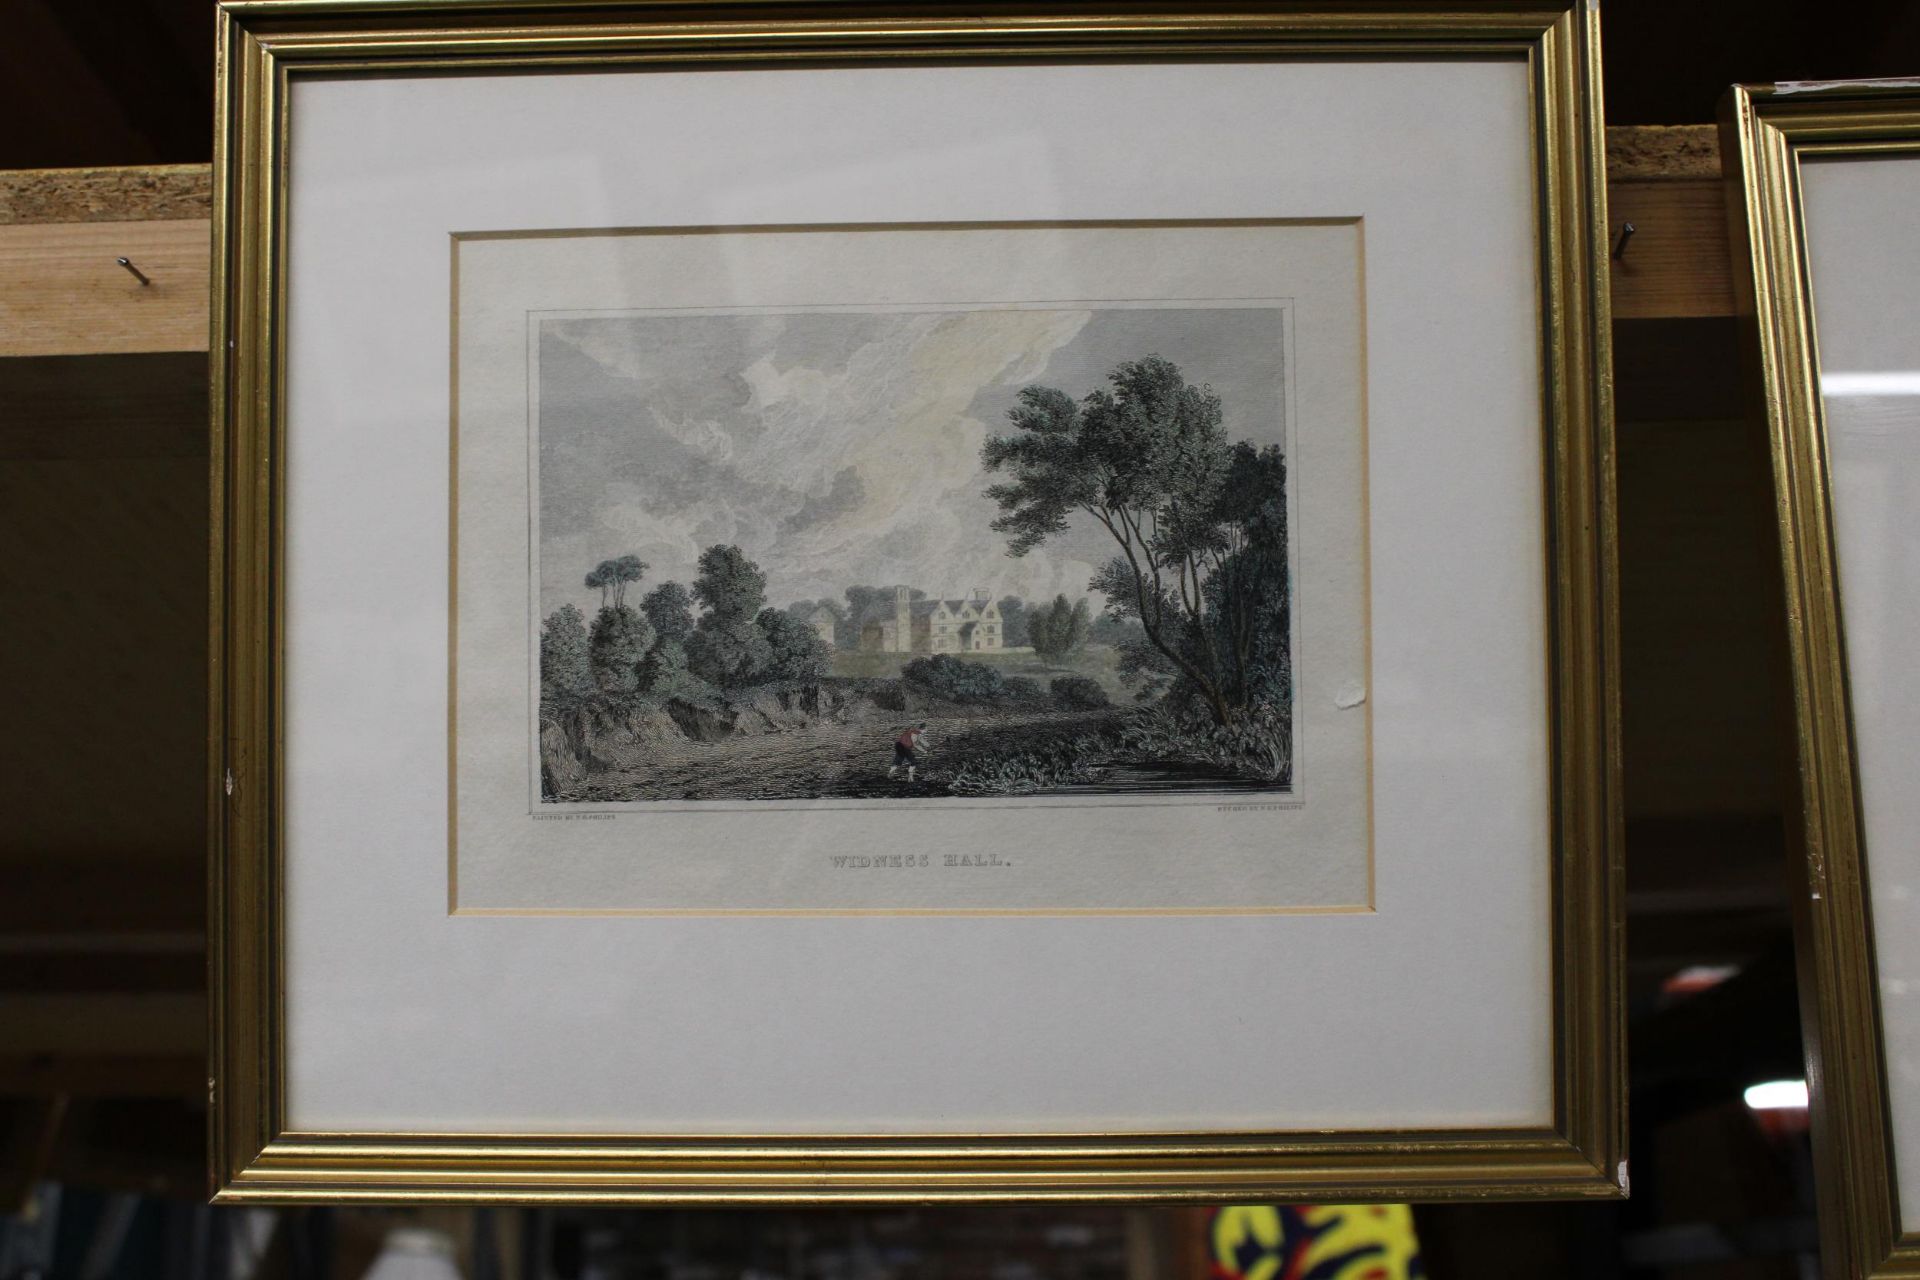 TWO VINTAGE COLOURED ENGRAVINGS, 'MOSLEYES HALL' AND 'WIDNESS HALL', FRAMED - Bild 2 aus 5